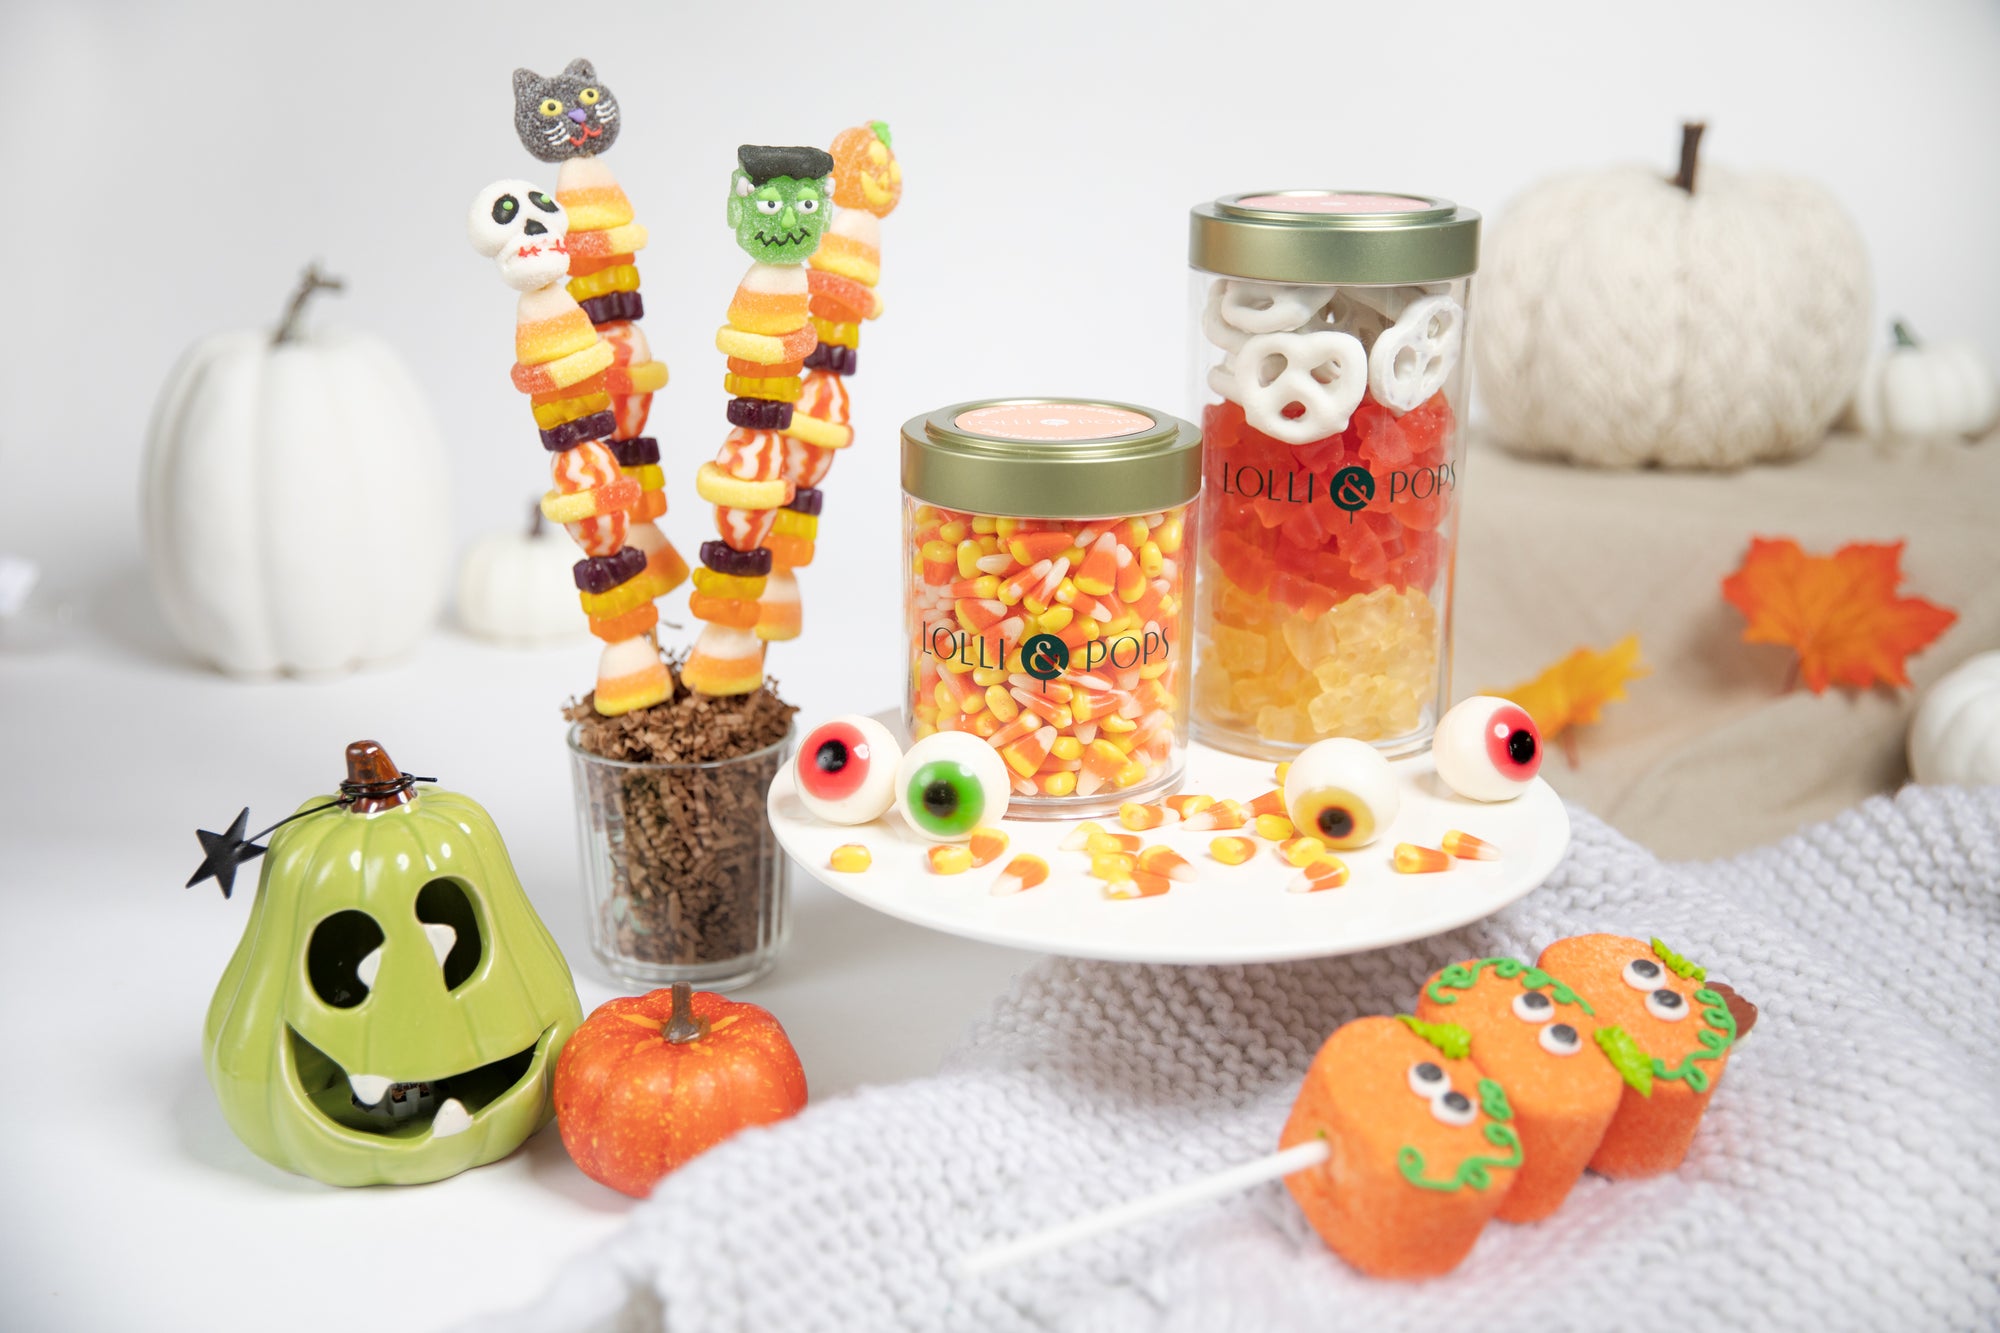 A New Halloween Tradition: Boo Baskets!